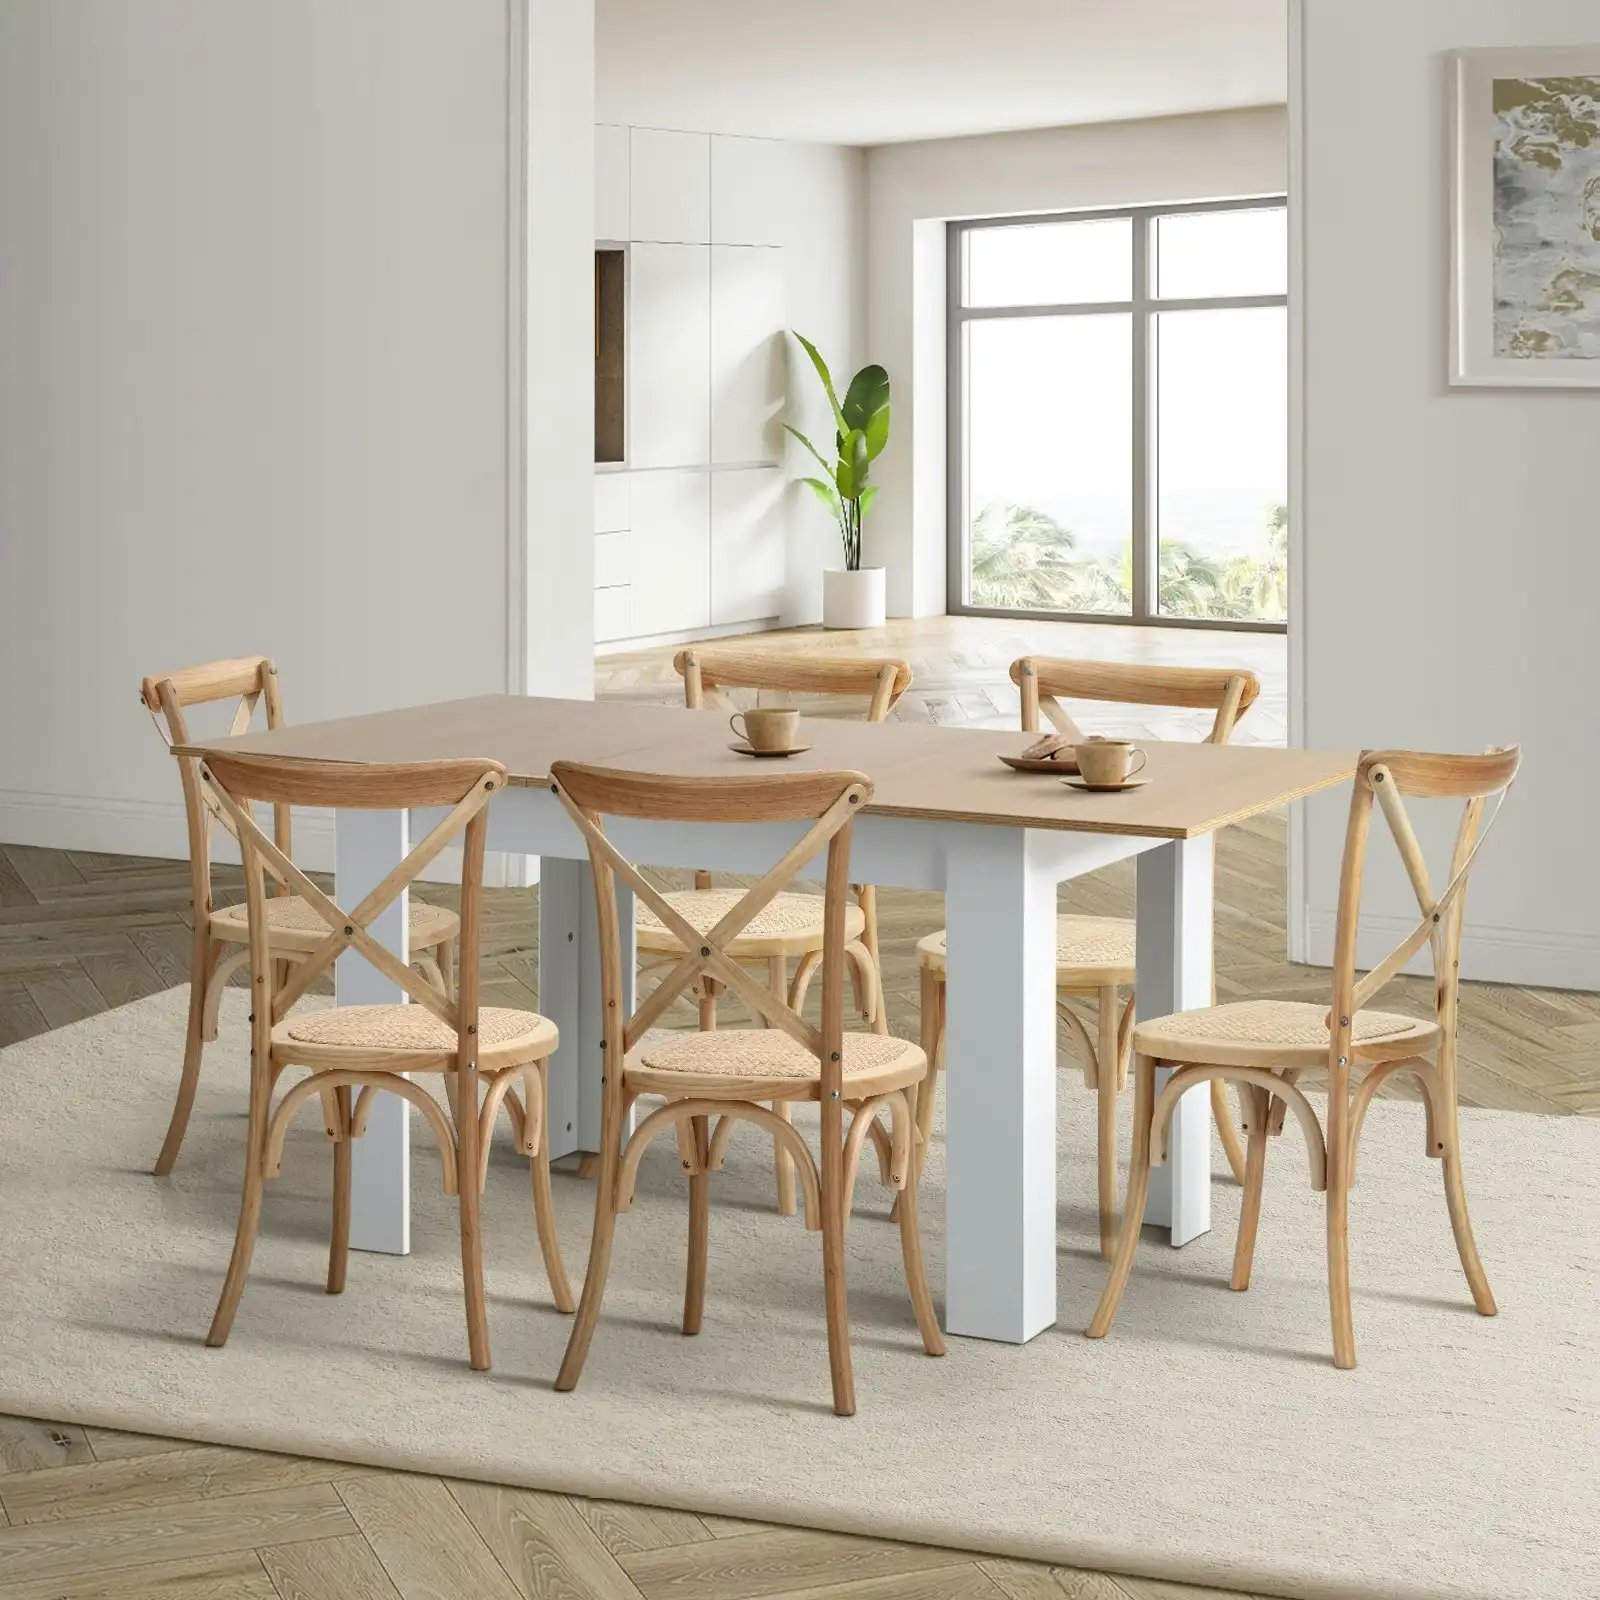 Oikiture 160cm Extendable Dining Table with 6PCS Dining Chairs Crossback Wooden